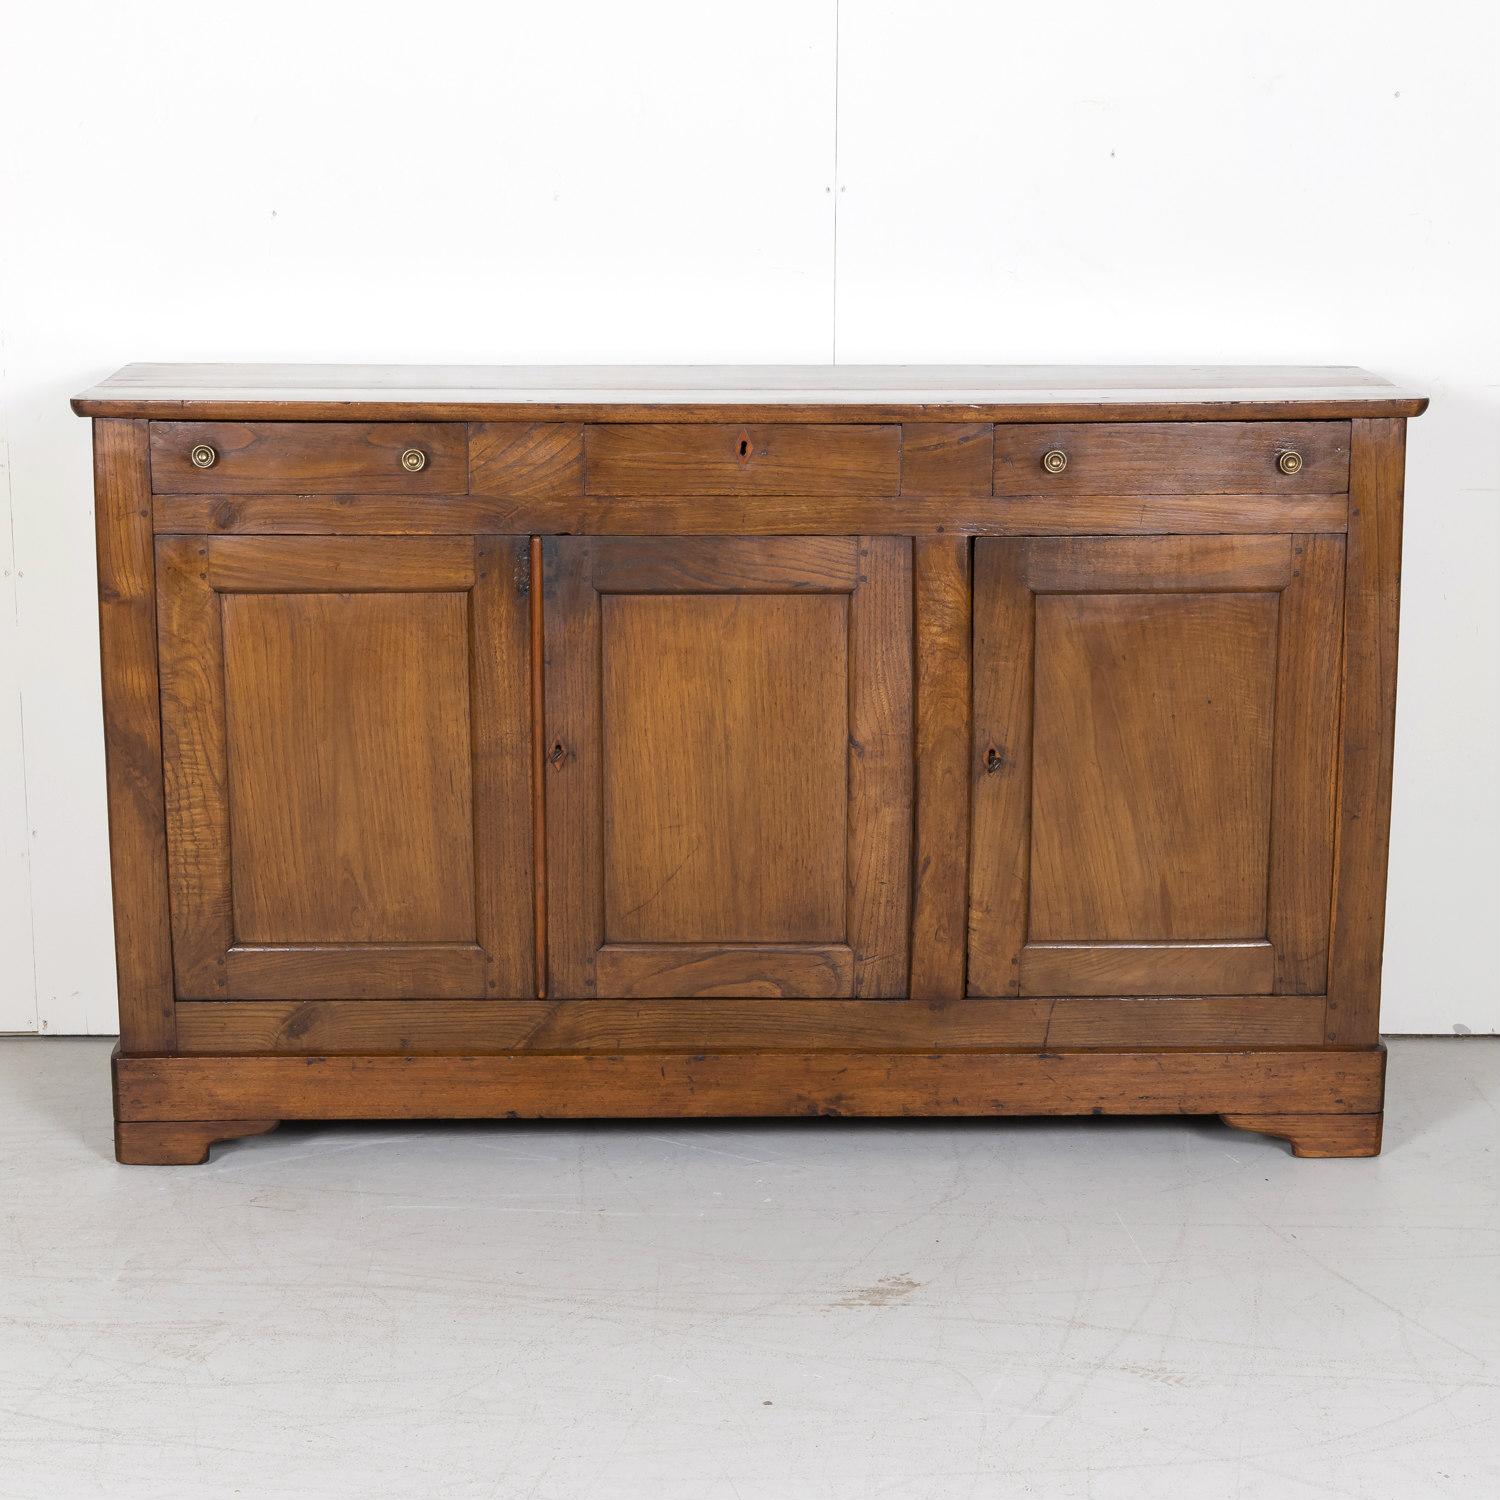 A 19th century French Louis Philippe style enfilade buffet d'appui or gentleman's buffet handcrafted of solid walnut and chestnut by skilled craftsmen near Bayeux, a town on the Aure river in the Normandy region of northwestern France, circa 1880s.